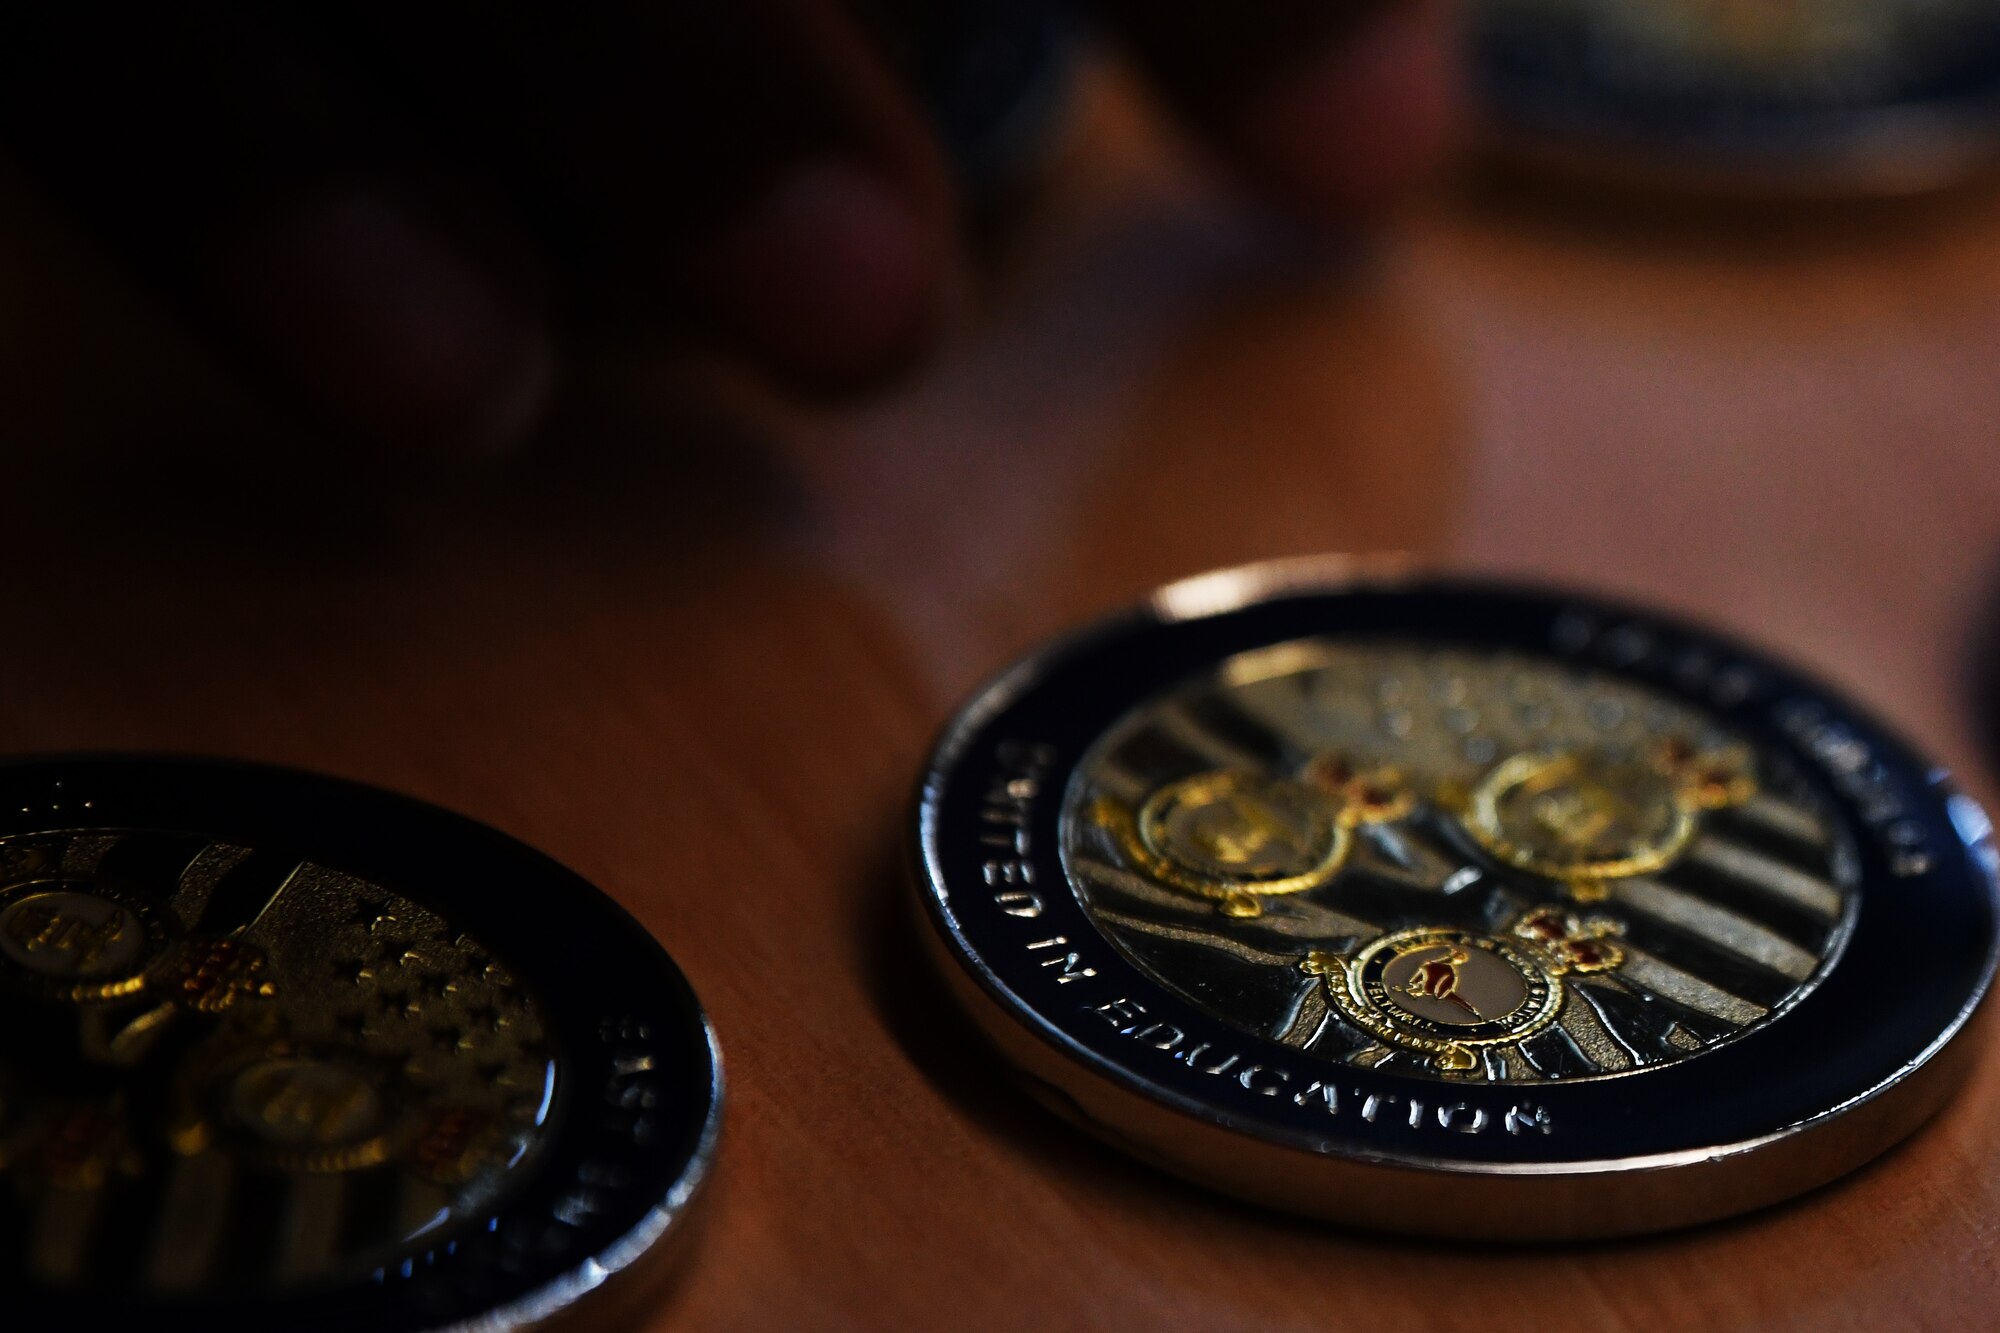 Educator coins are displayed during the annual teacher’s forum at Royal Air Force Lakenheath, England, Aug. 29, 2019. Wing leadership had the opportunity to welcome new educators to RAF Lakenheath and RAF Feltwell and share tri-base updates, congratulatory remarks, and execute a coining ceremony to commemorate their induction into the Liberty Wing family. (U.S. Air Force photo by Airman 1st Class Shanice Williams-Jones)